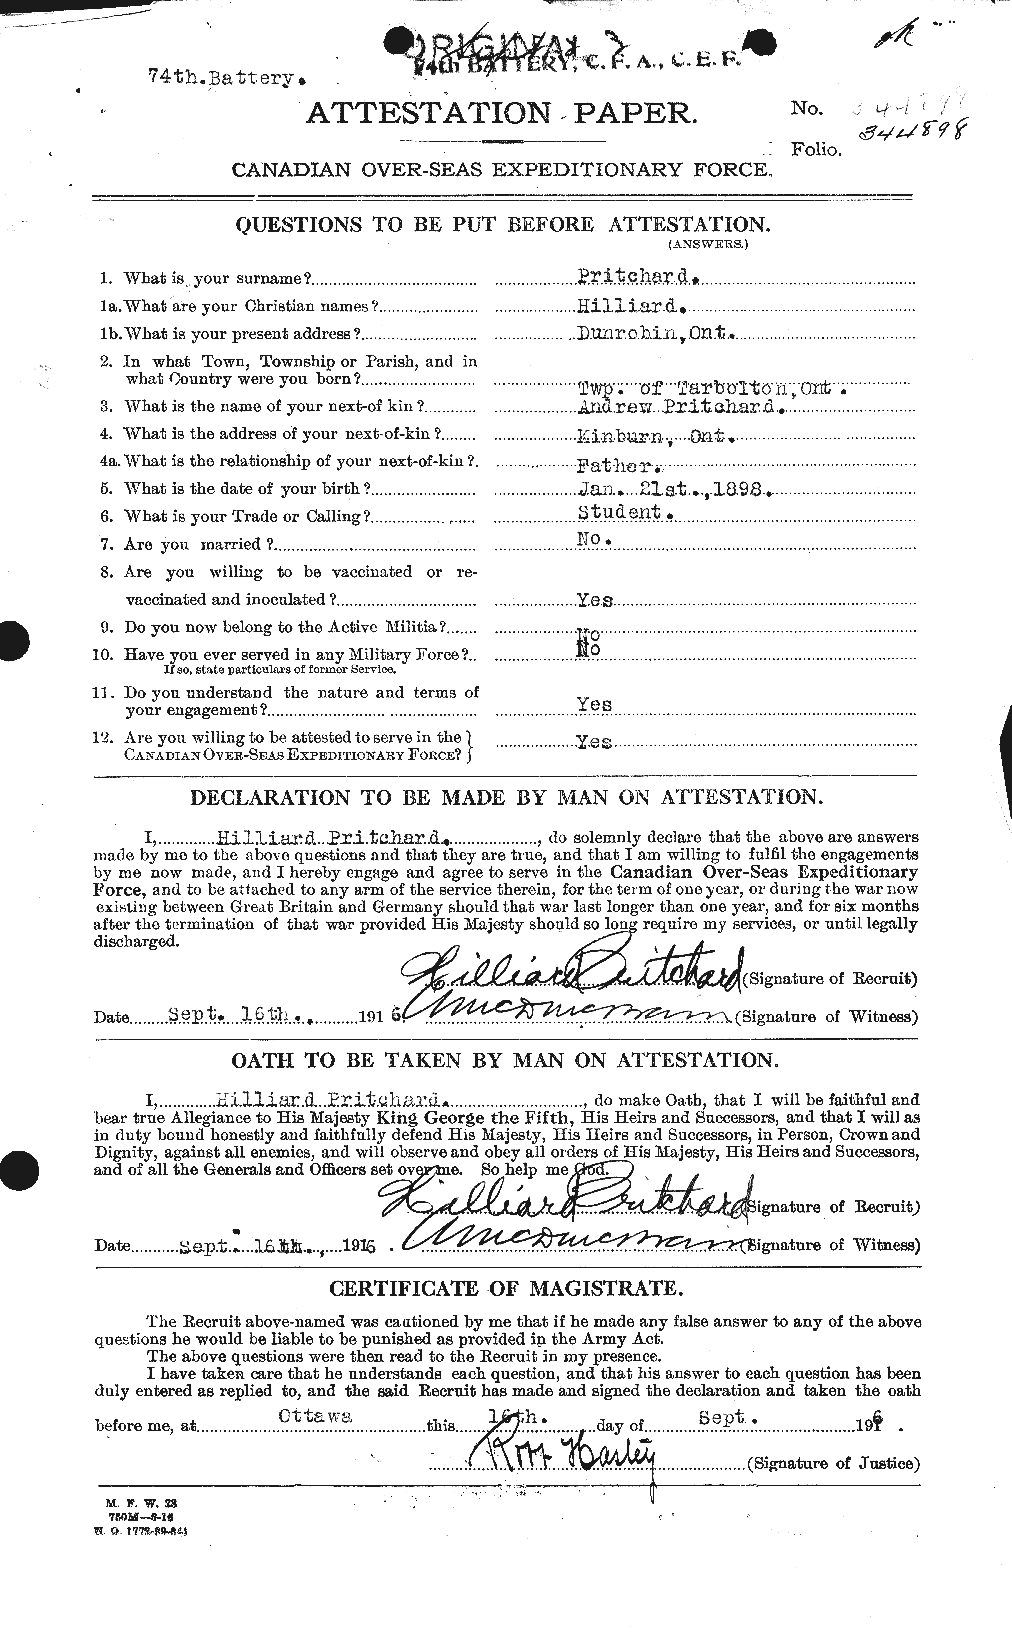 Personnel Records of the First World War - CEF 588551a